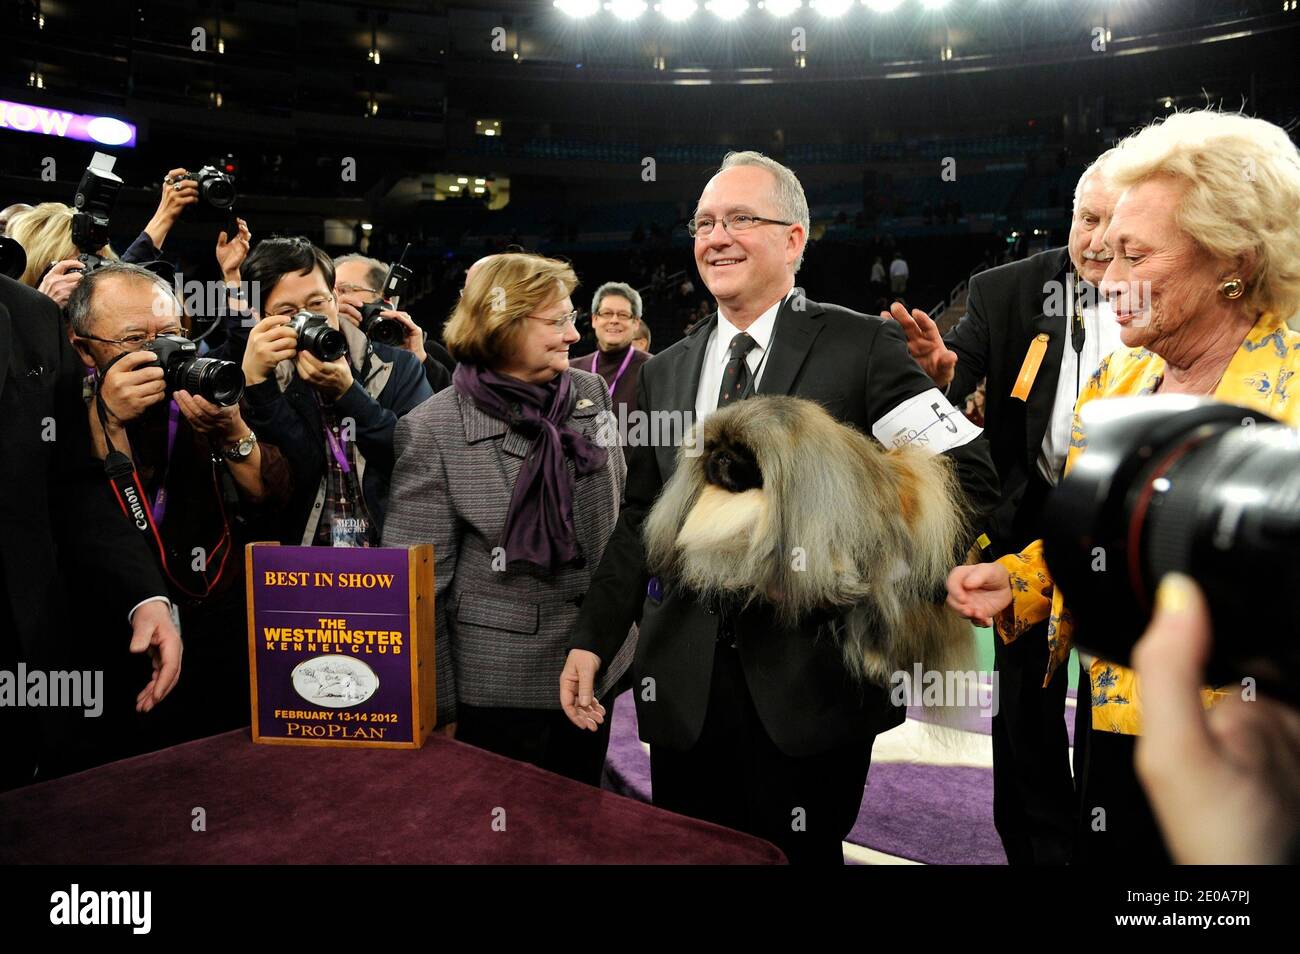 Malachy the Pekingese wins the best in show at the 136th Annual Westminster Kennel Club dog show, held at Madison Square Garden in New York City, NY, USA on February 14, 2012. Photo by Graylock/ABACAPRESS.COM Stock Photo